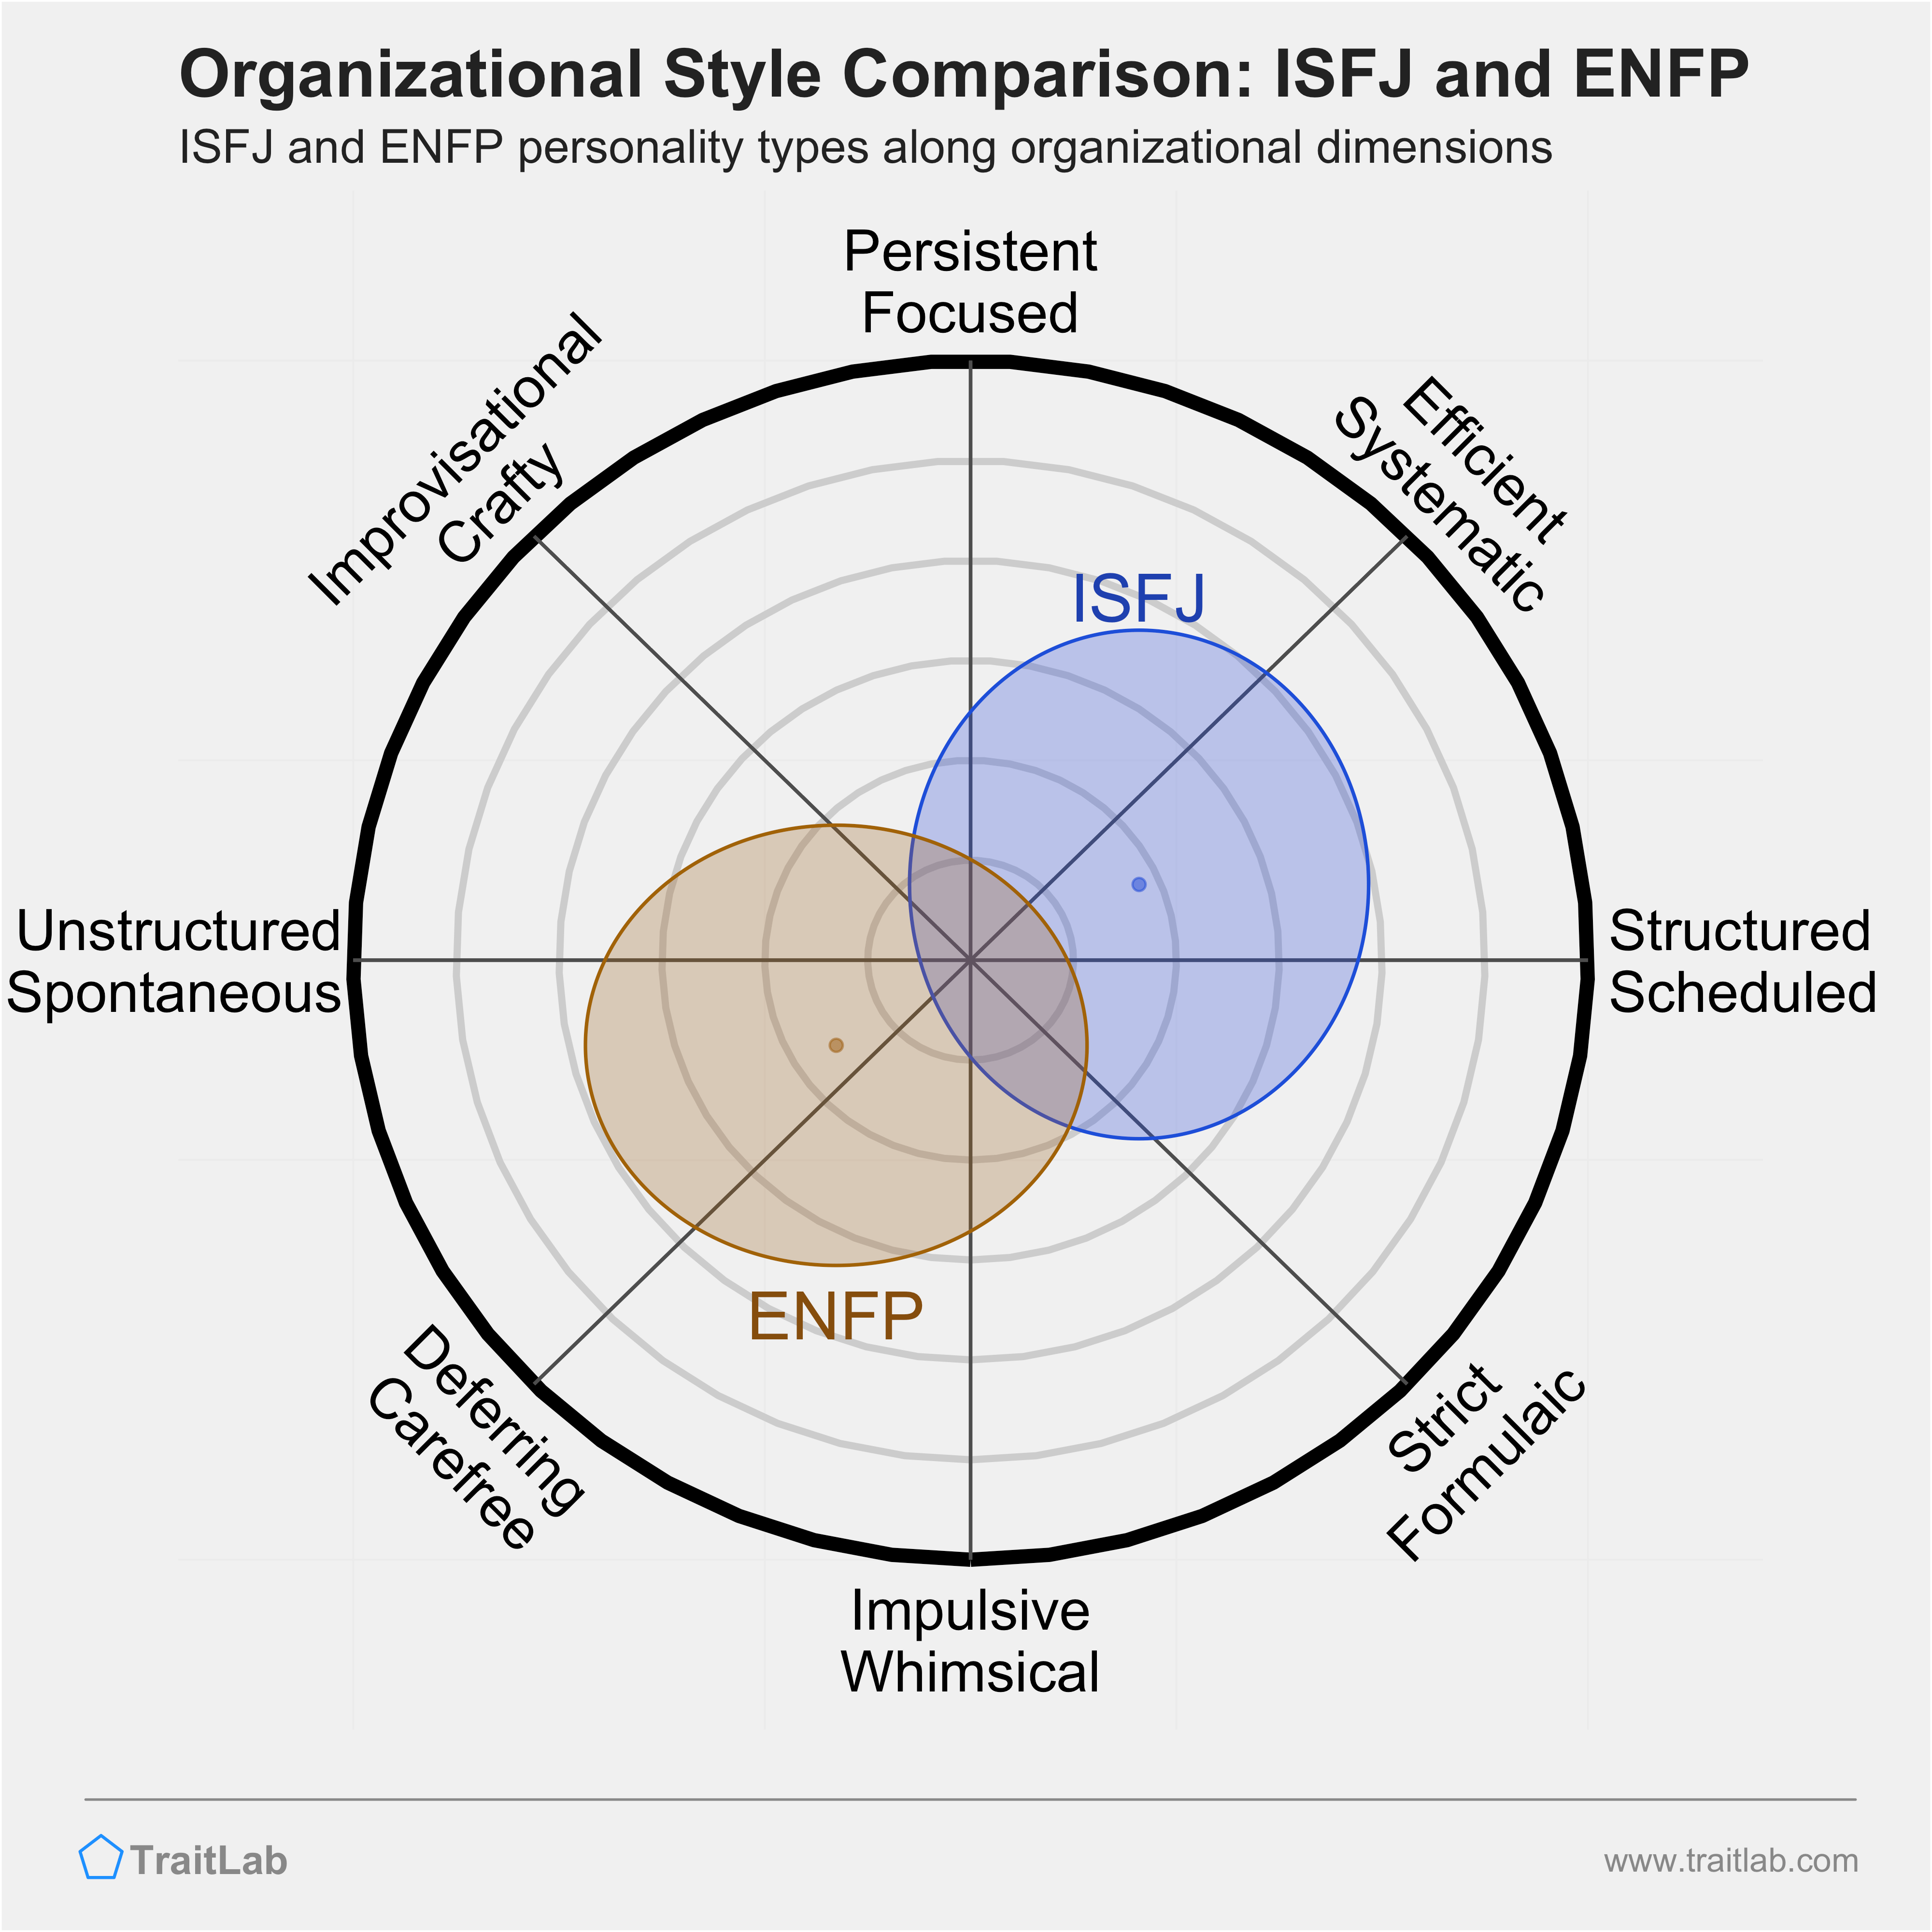 ISFJ and ENFP comparison across organizational dimensions